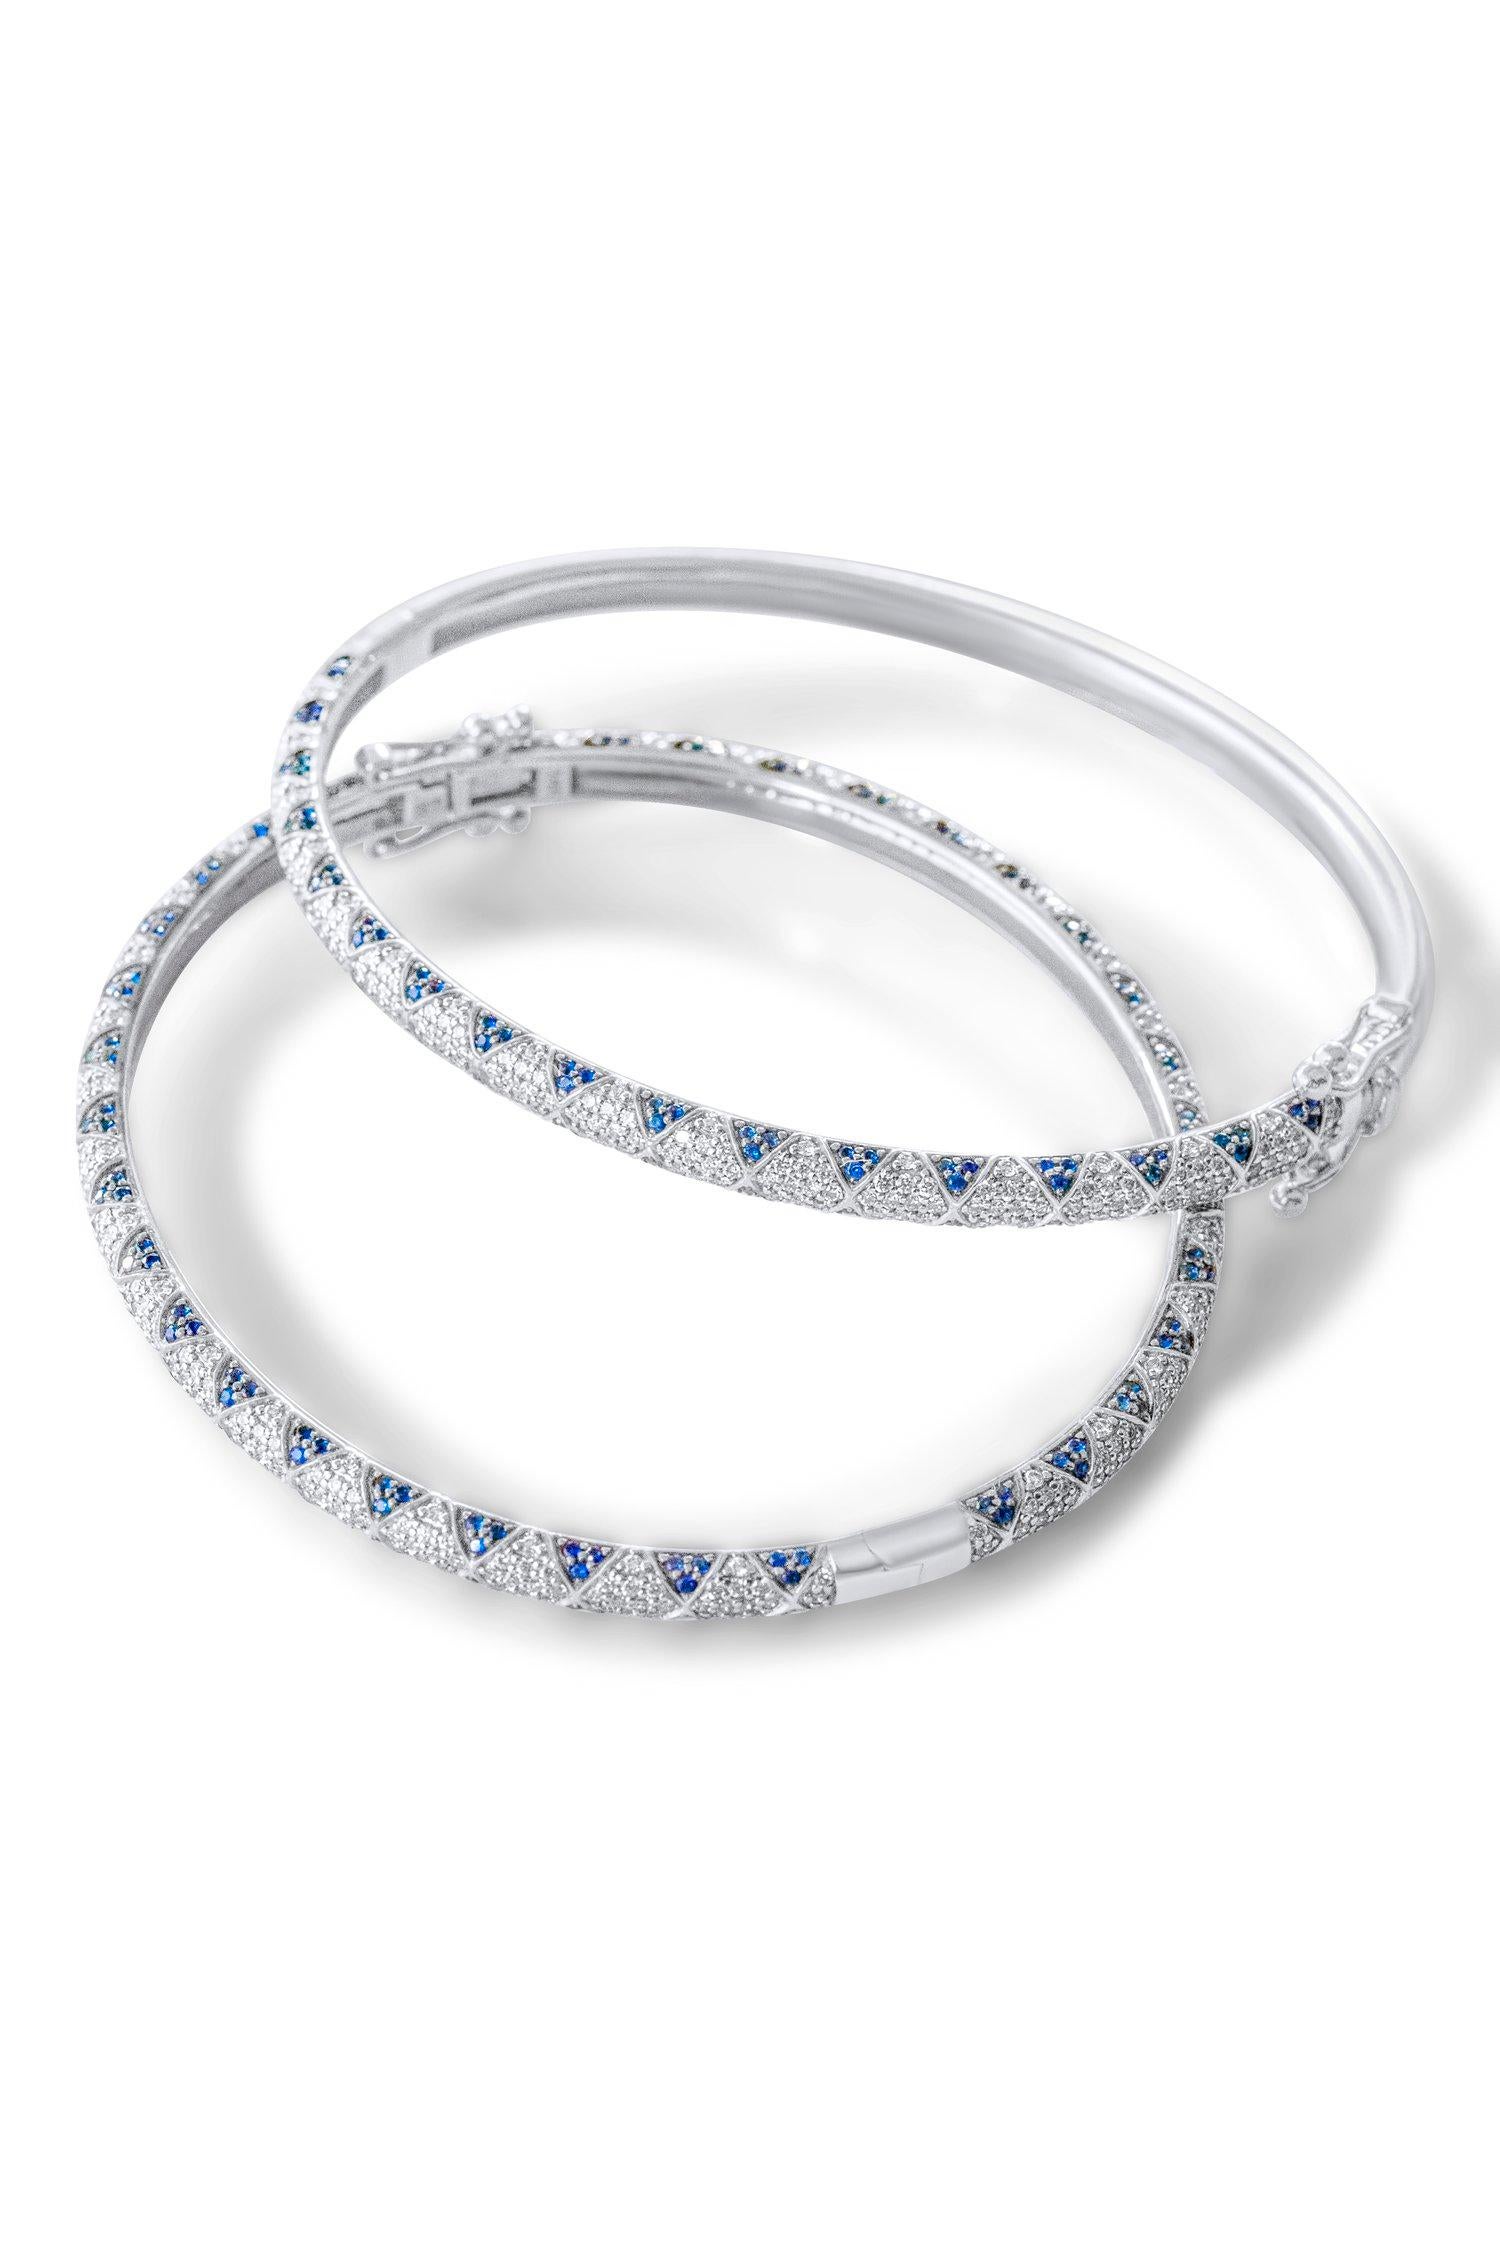 Bangle in 14k White Gold. These bangles include pave set emerald petals in a lotus motif and pave set white diamonds and are part of Rinoor’s Lotus collection. They can be mixed and matched and paired with rings, earrings and necklaces from the same